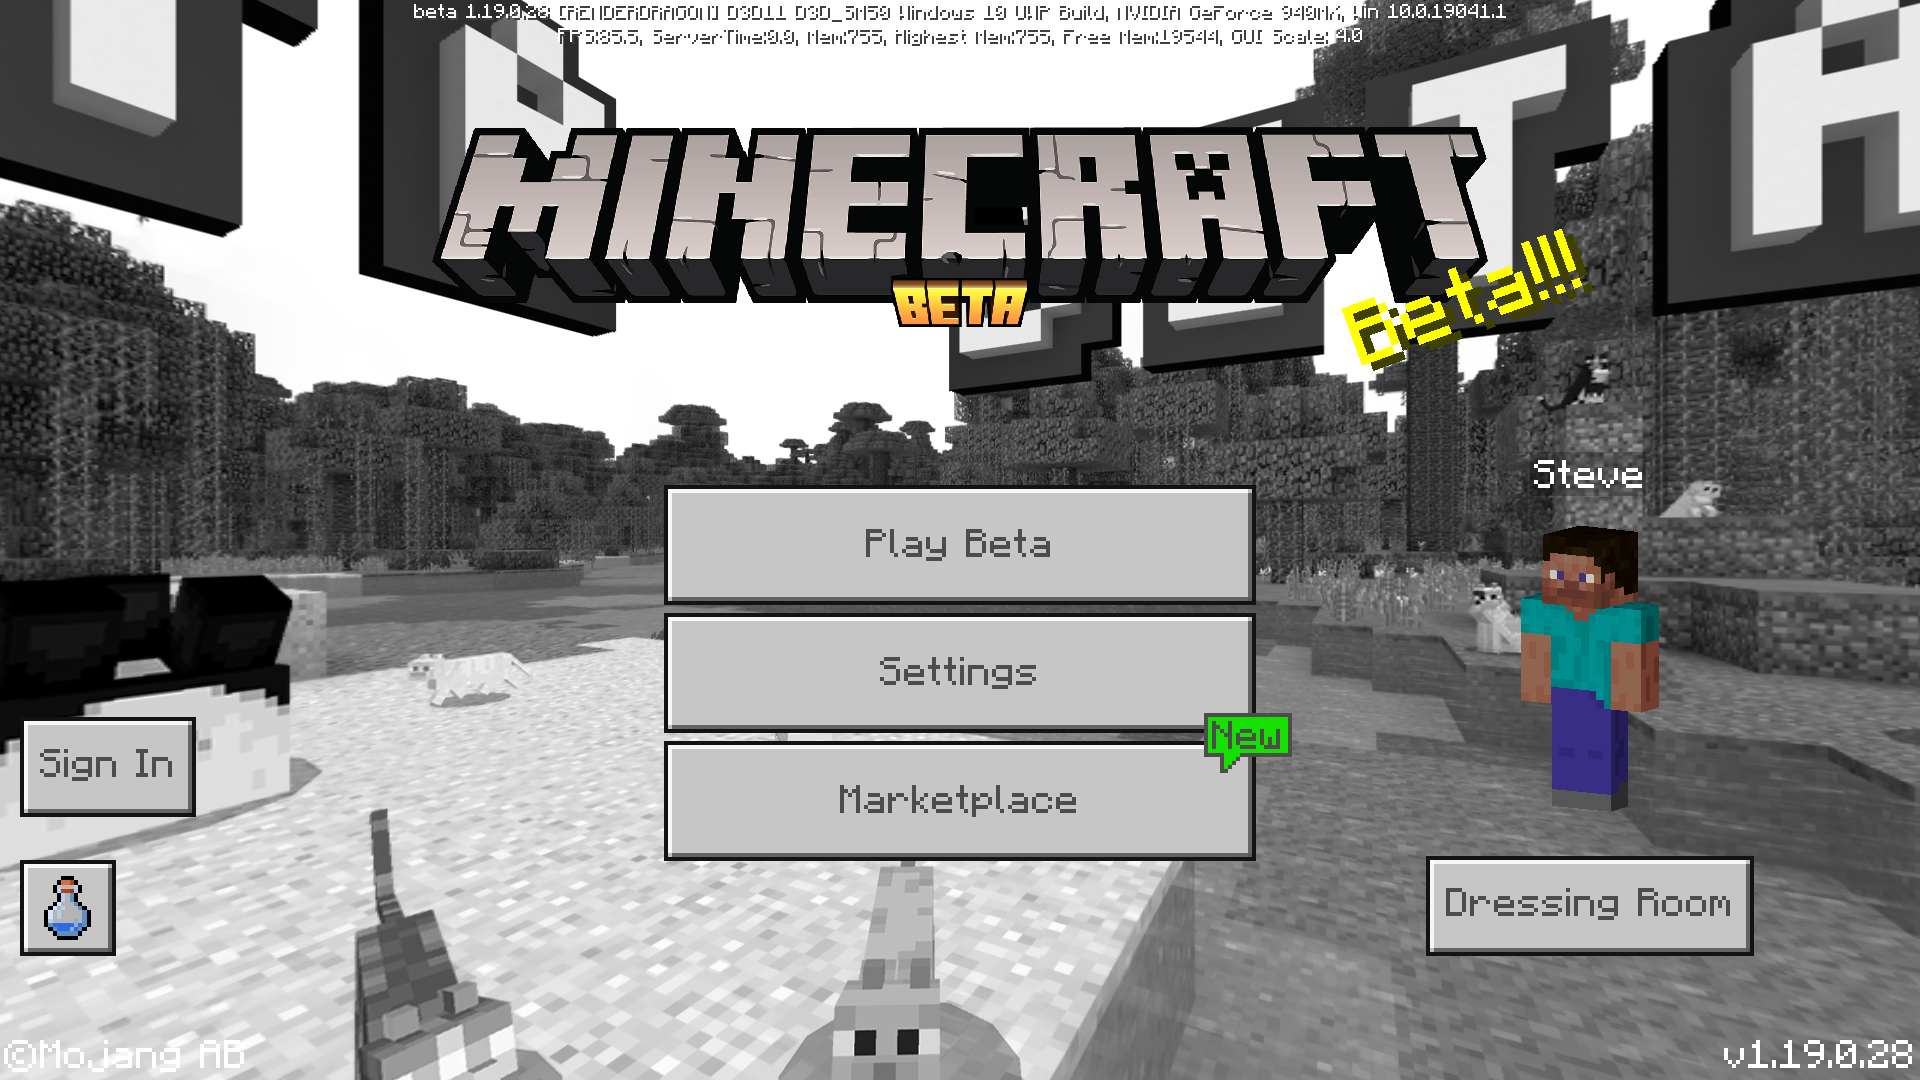 Minecraft Preview 1.19.50.20 improves vanilla parity and Spectator Mode